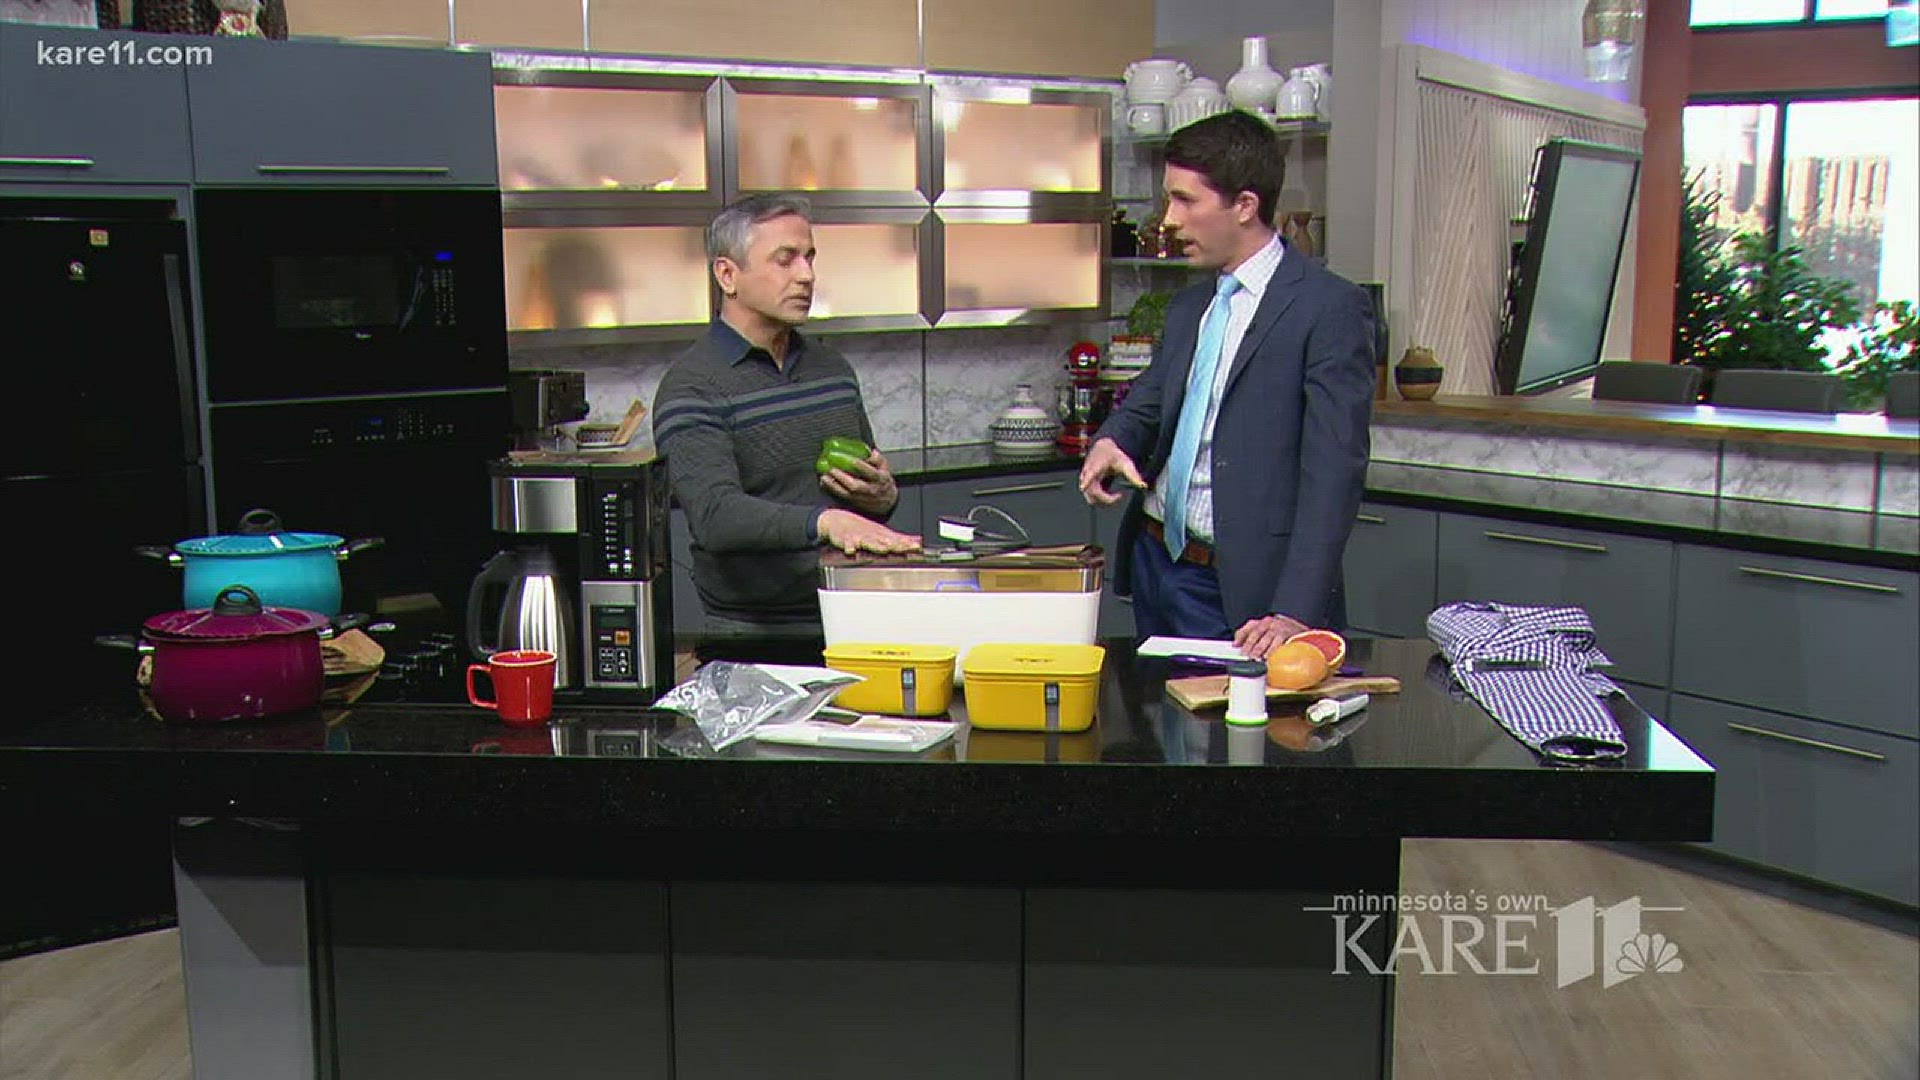 Lifestyle expert, David Viggiano, is here to show us some of the newest and coolest products from the International Home and Housewares Show. http://kare11.tv/2Fpdoak